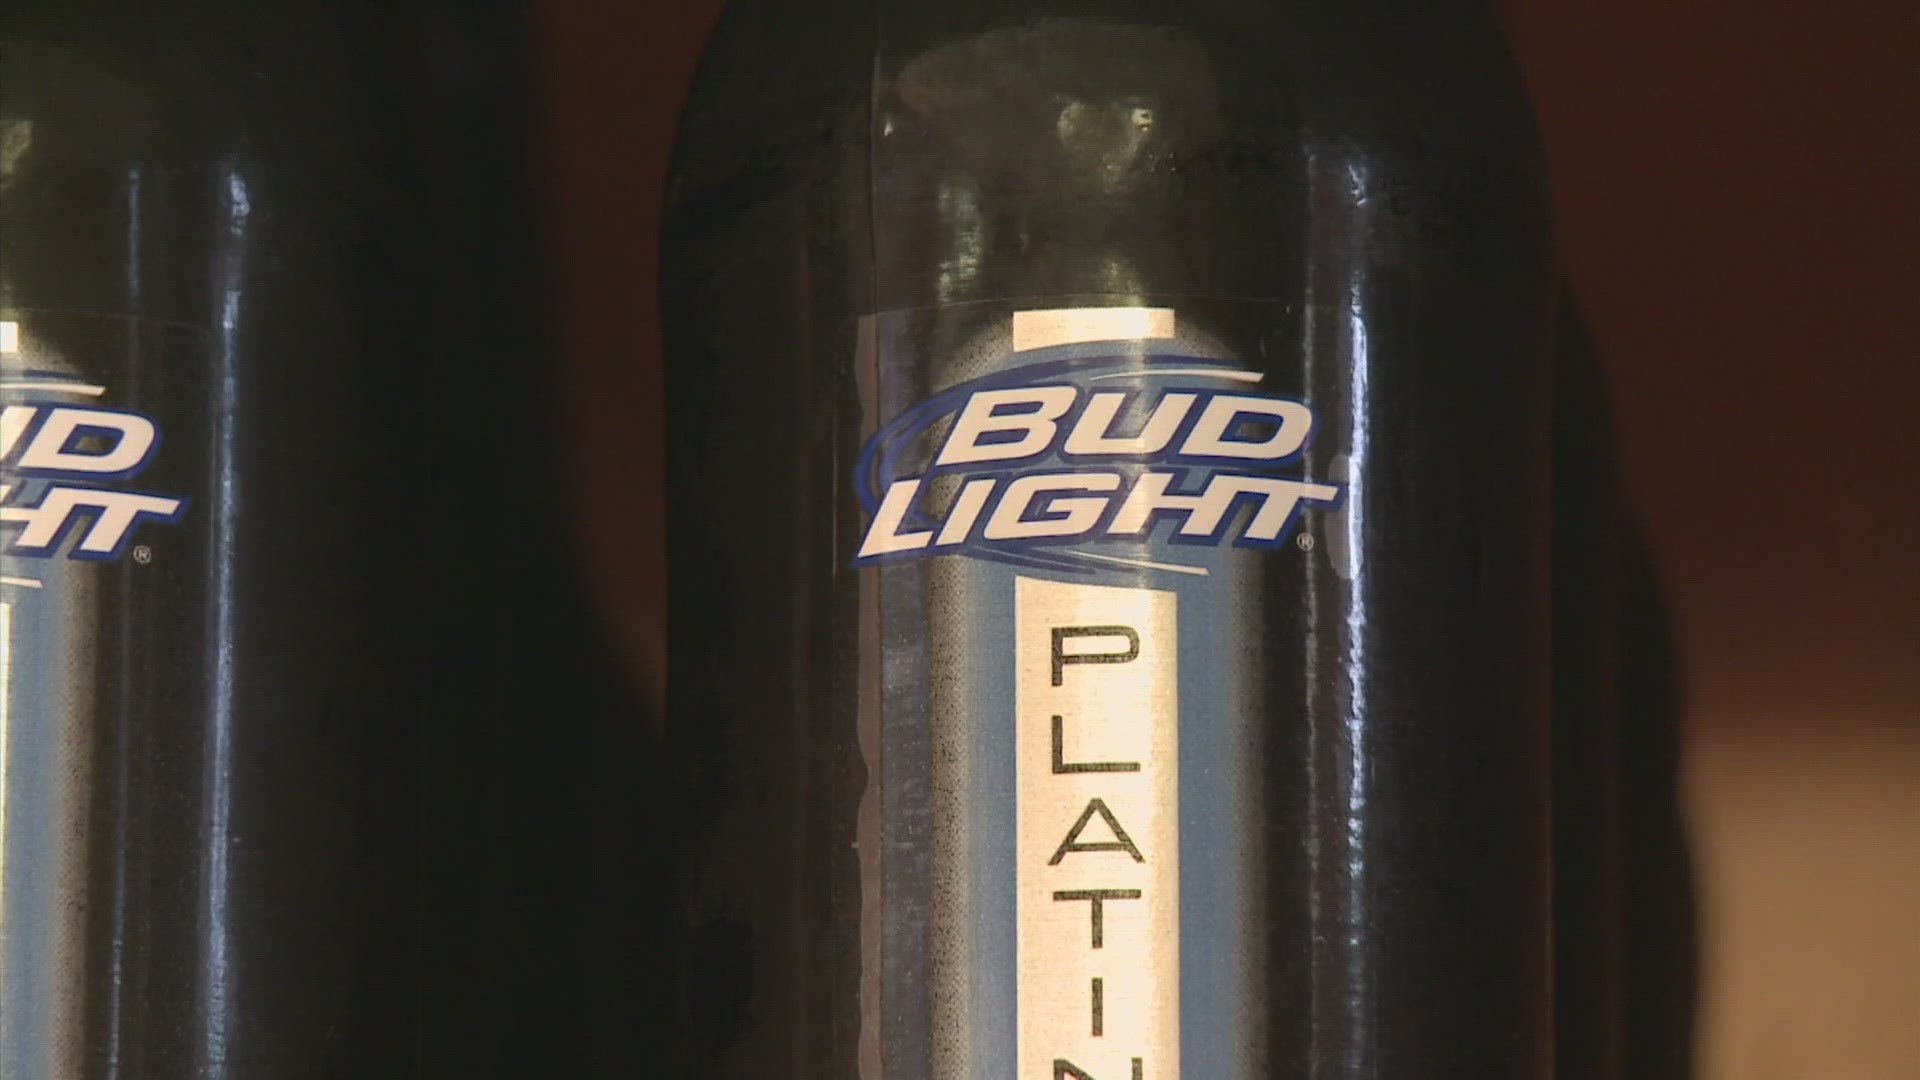 Bud Light began a trans-inclusive marketing push that led to a decline in sales, but now there are signs the worst might be over.